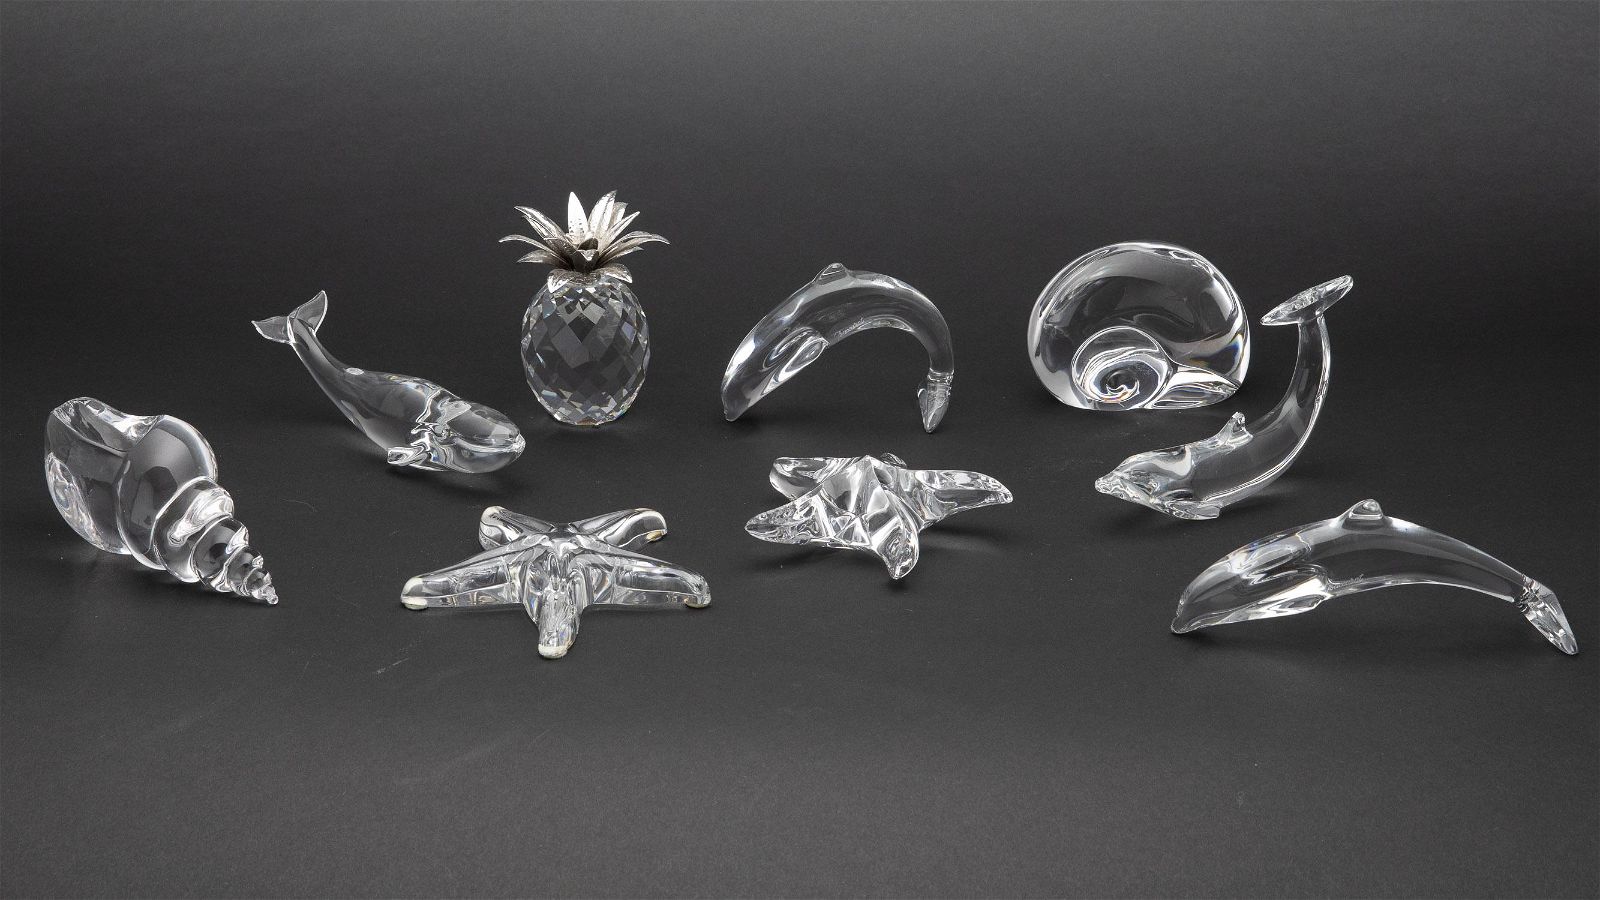 9 GLASS ANIMALS SHELLS AND FRUIT 3d33f0